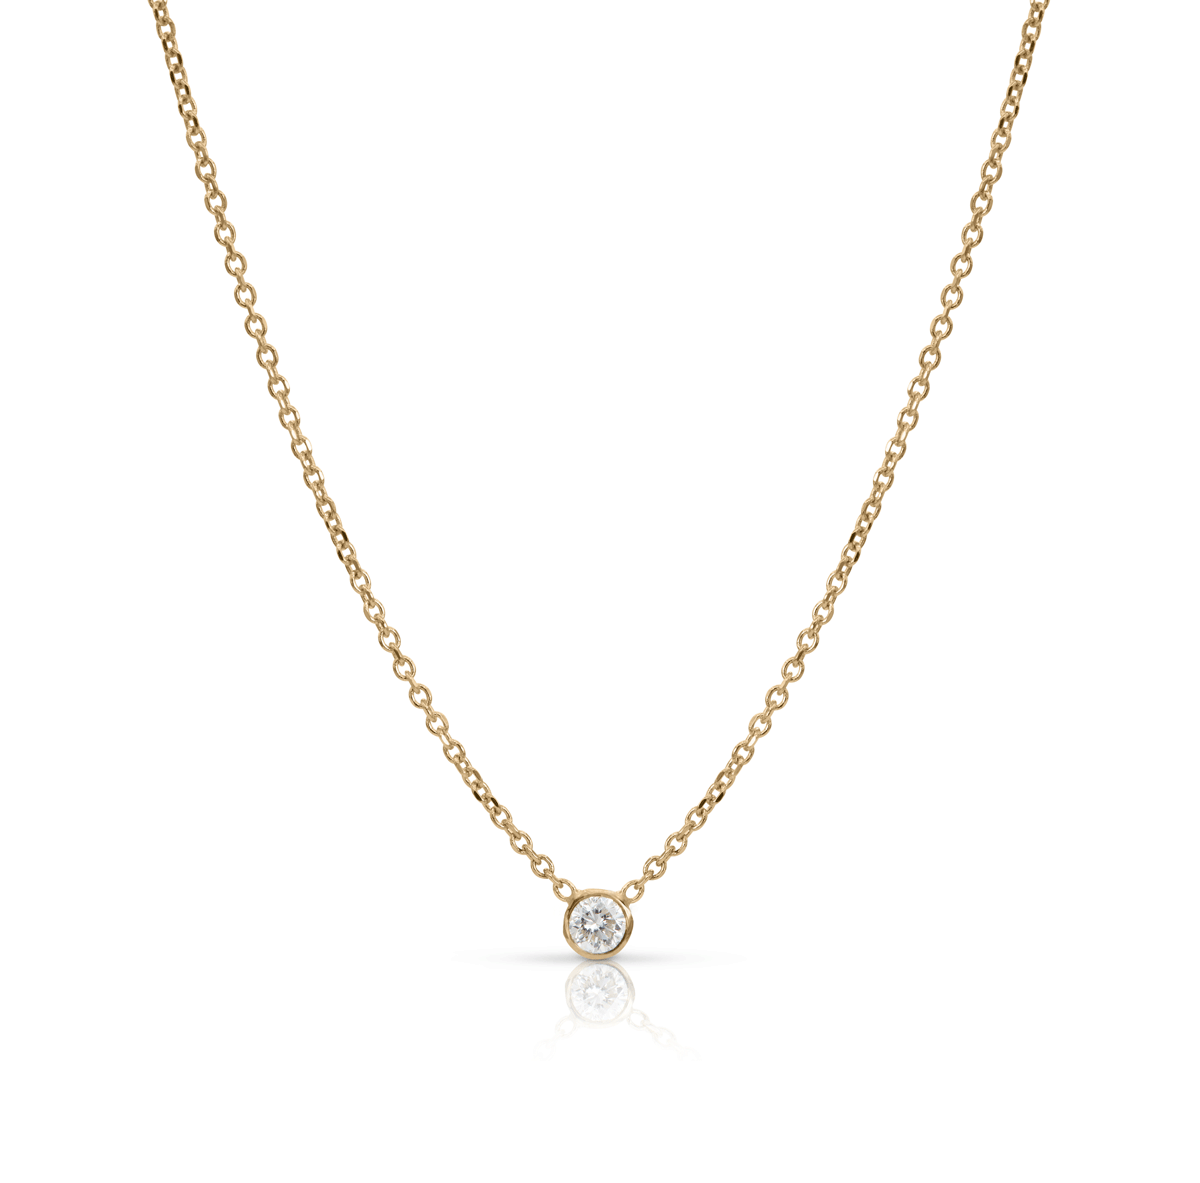 Bezel diamond baguette necklace and thin gold chain on white background